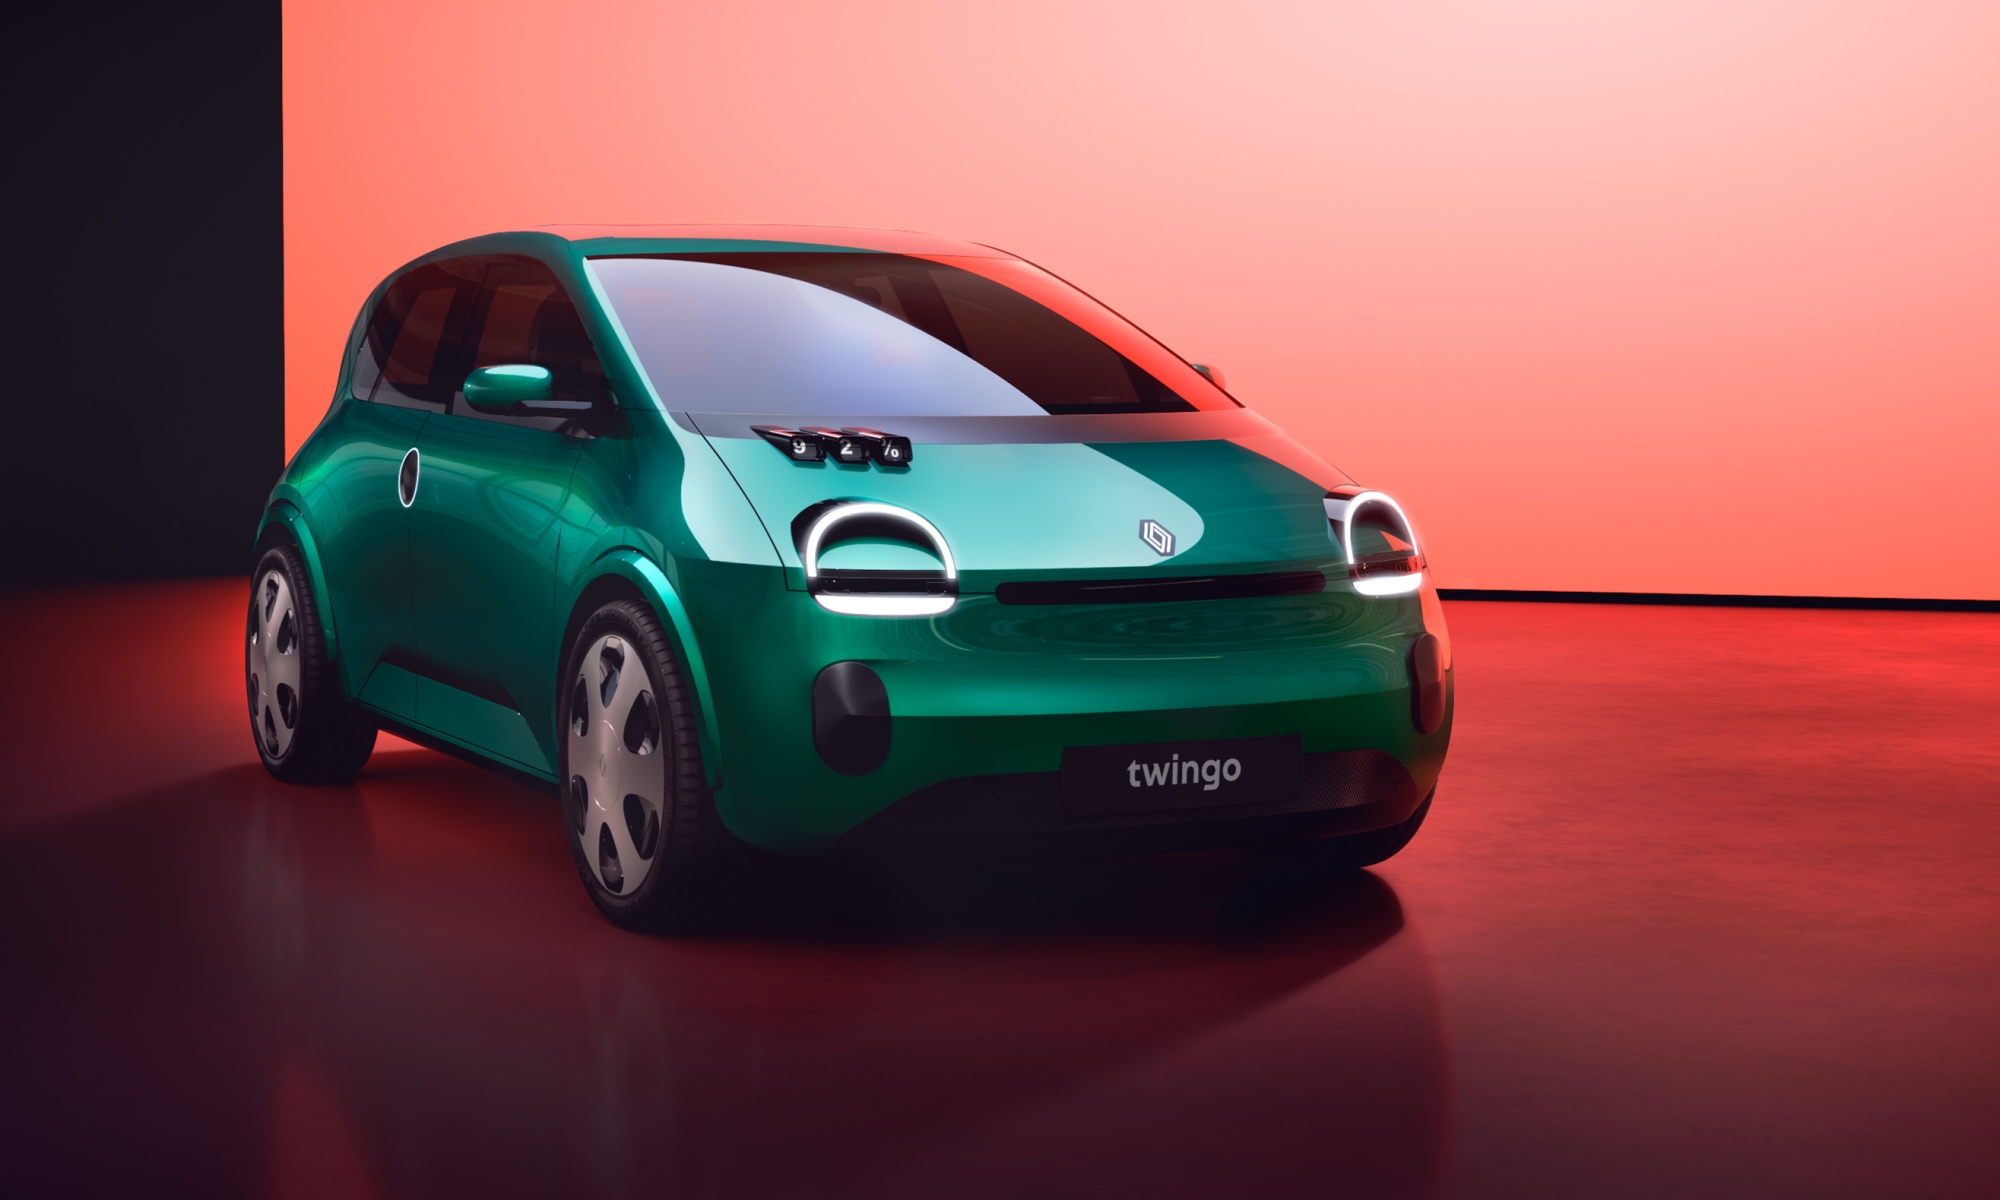 The Renault Twingo electric car will be small, cheap and very cute